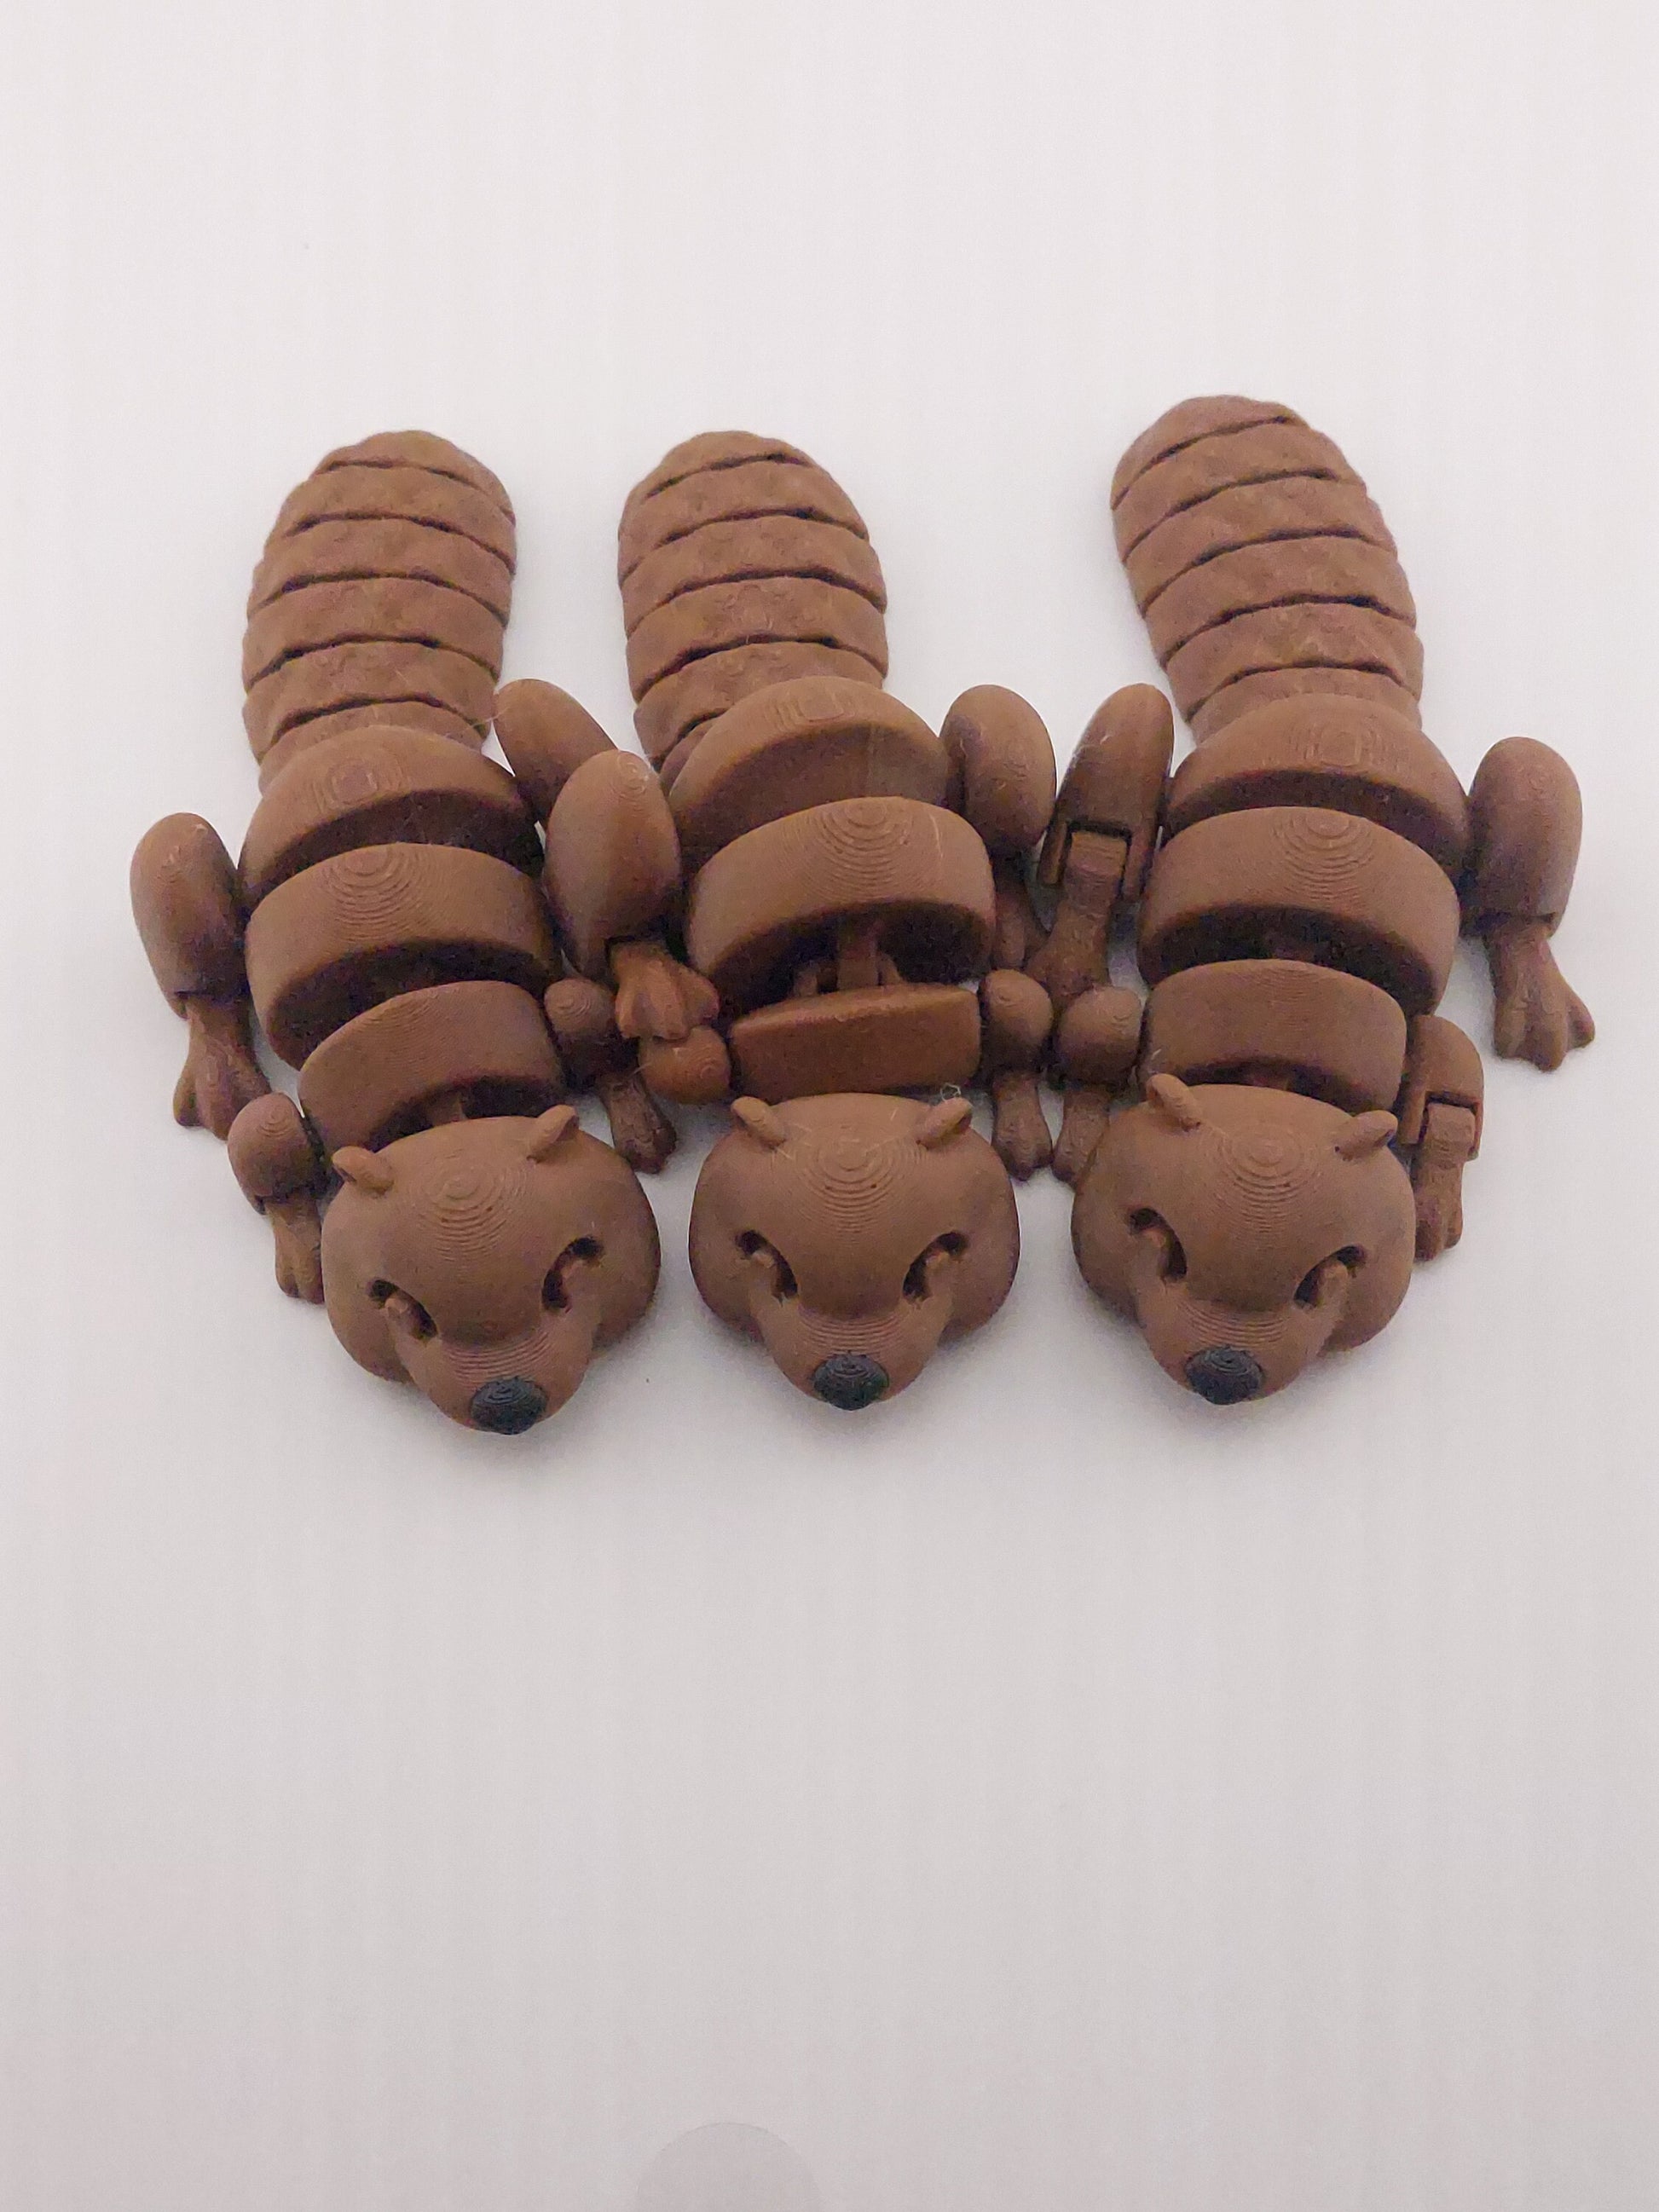 1 Articulated Painted Beaver - 3D Printed Fidget Fantasy Creature